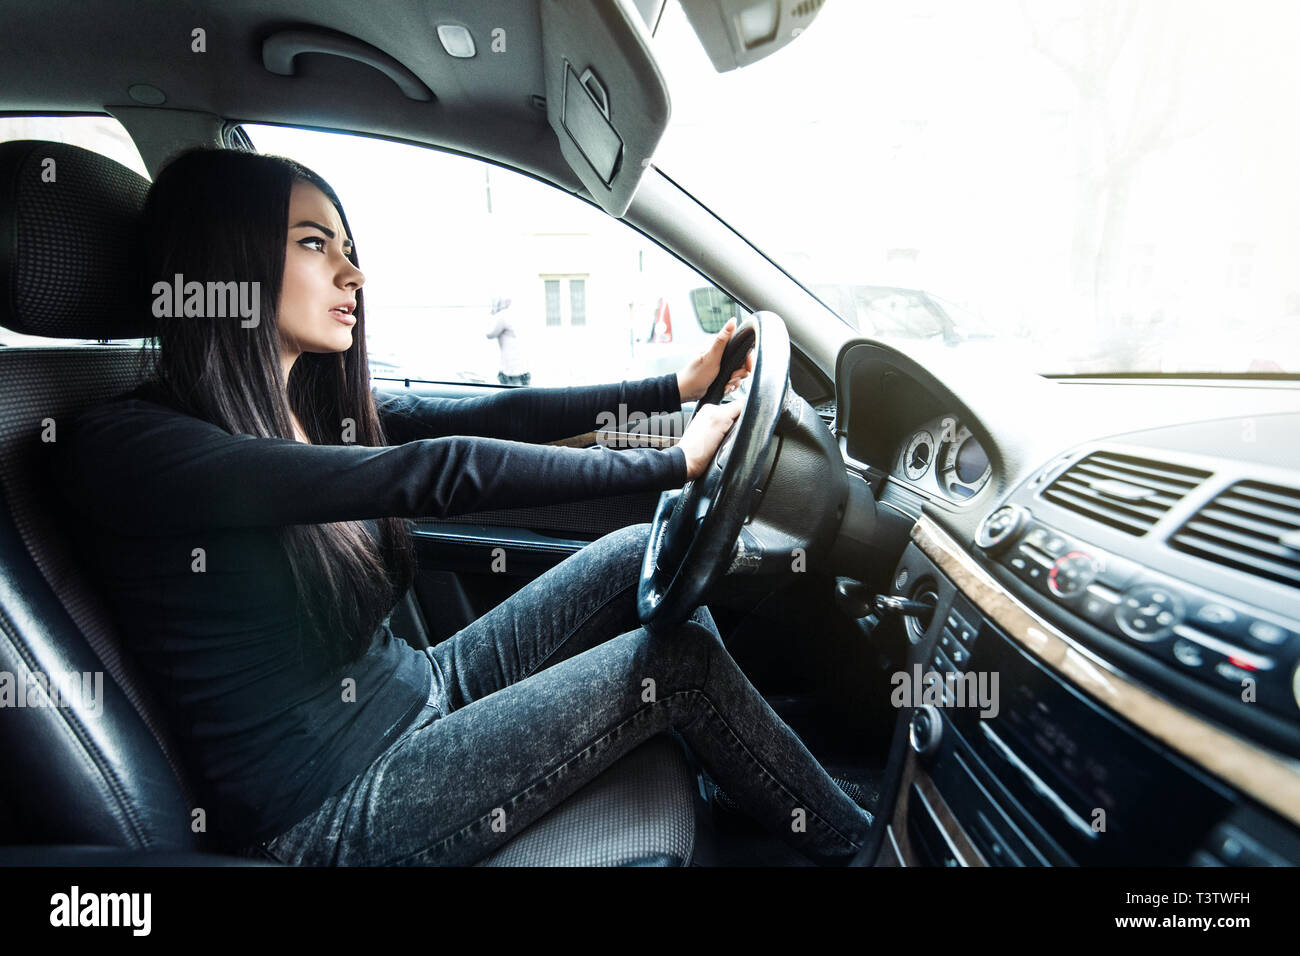 transportation and vehicle concept - woman driving a car with hand on horn button Stock Photo